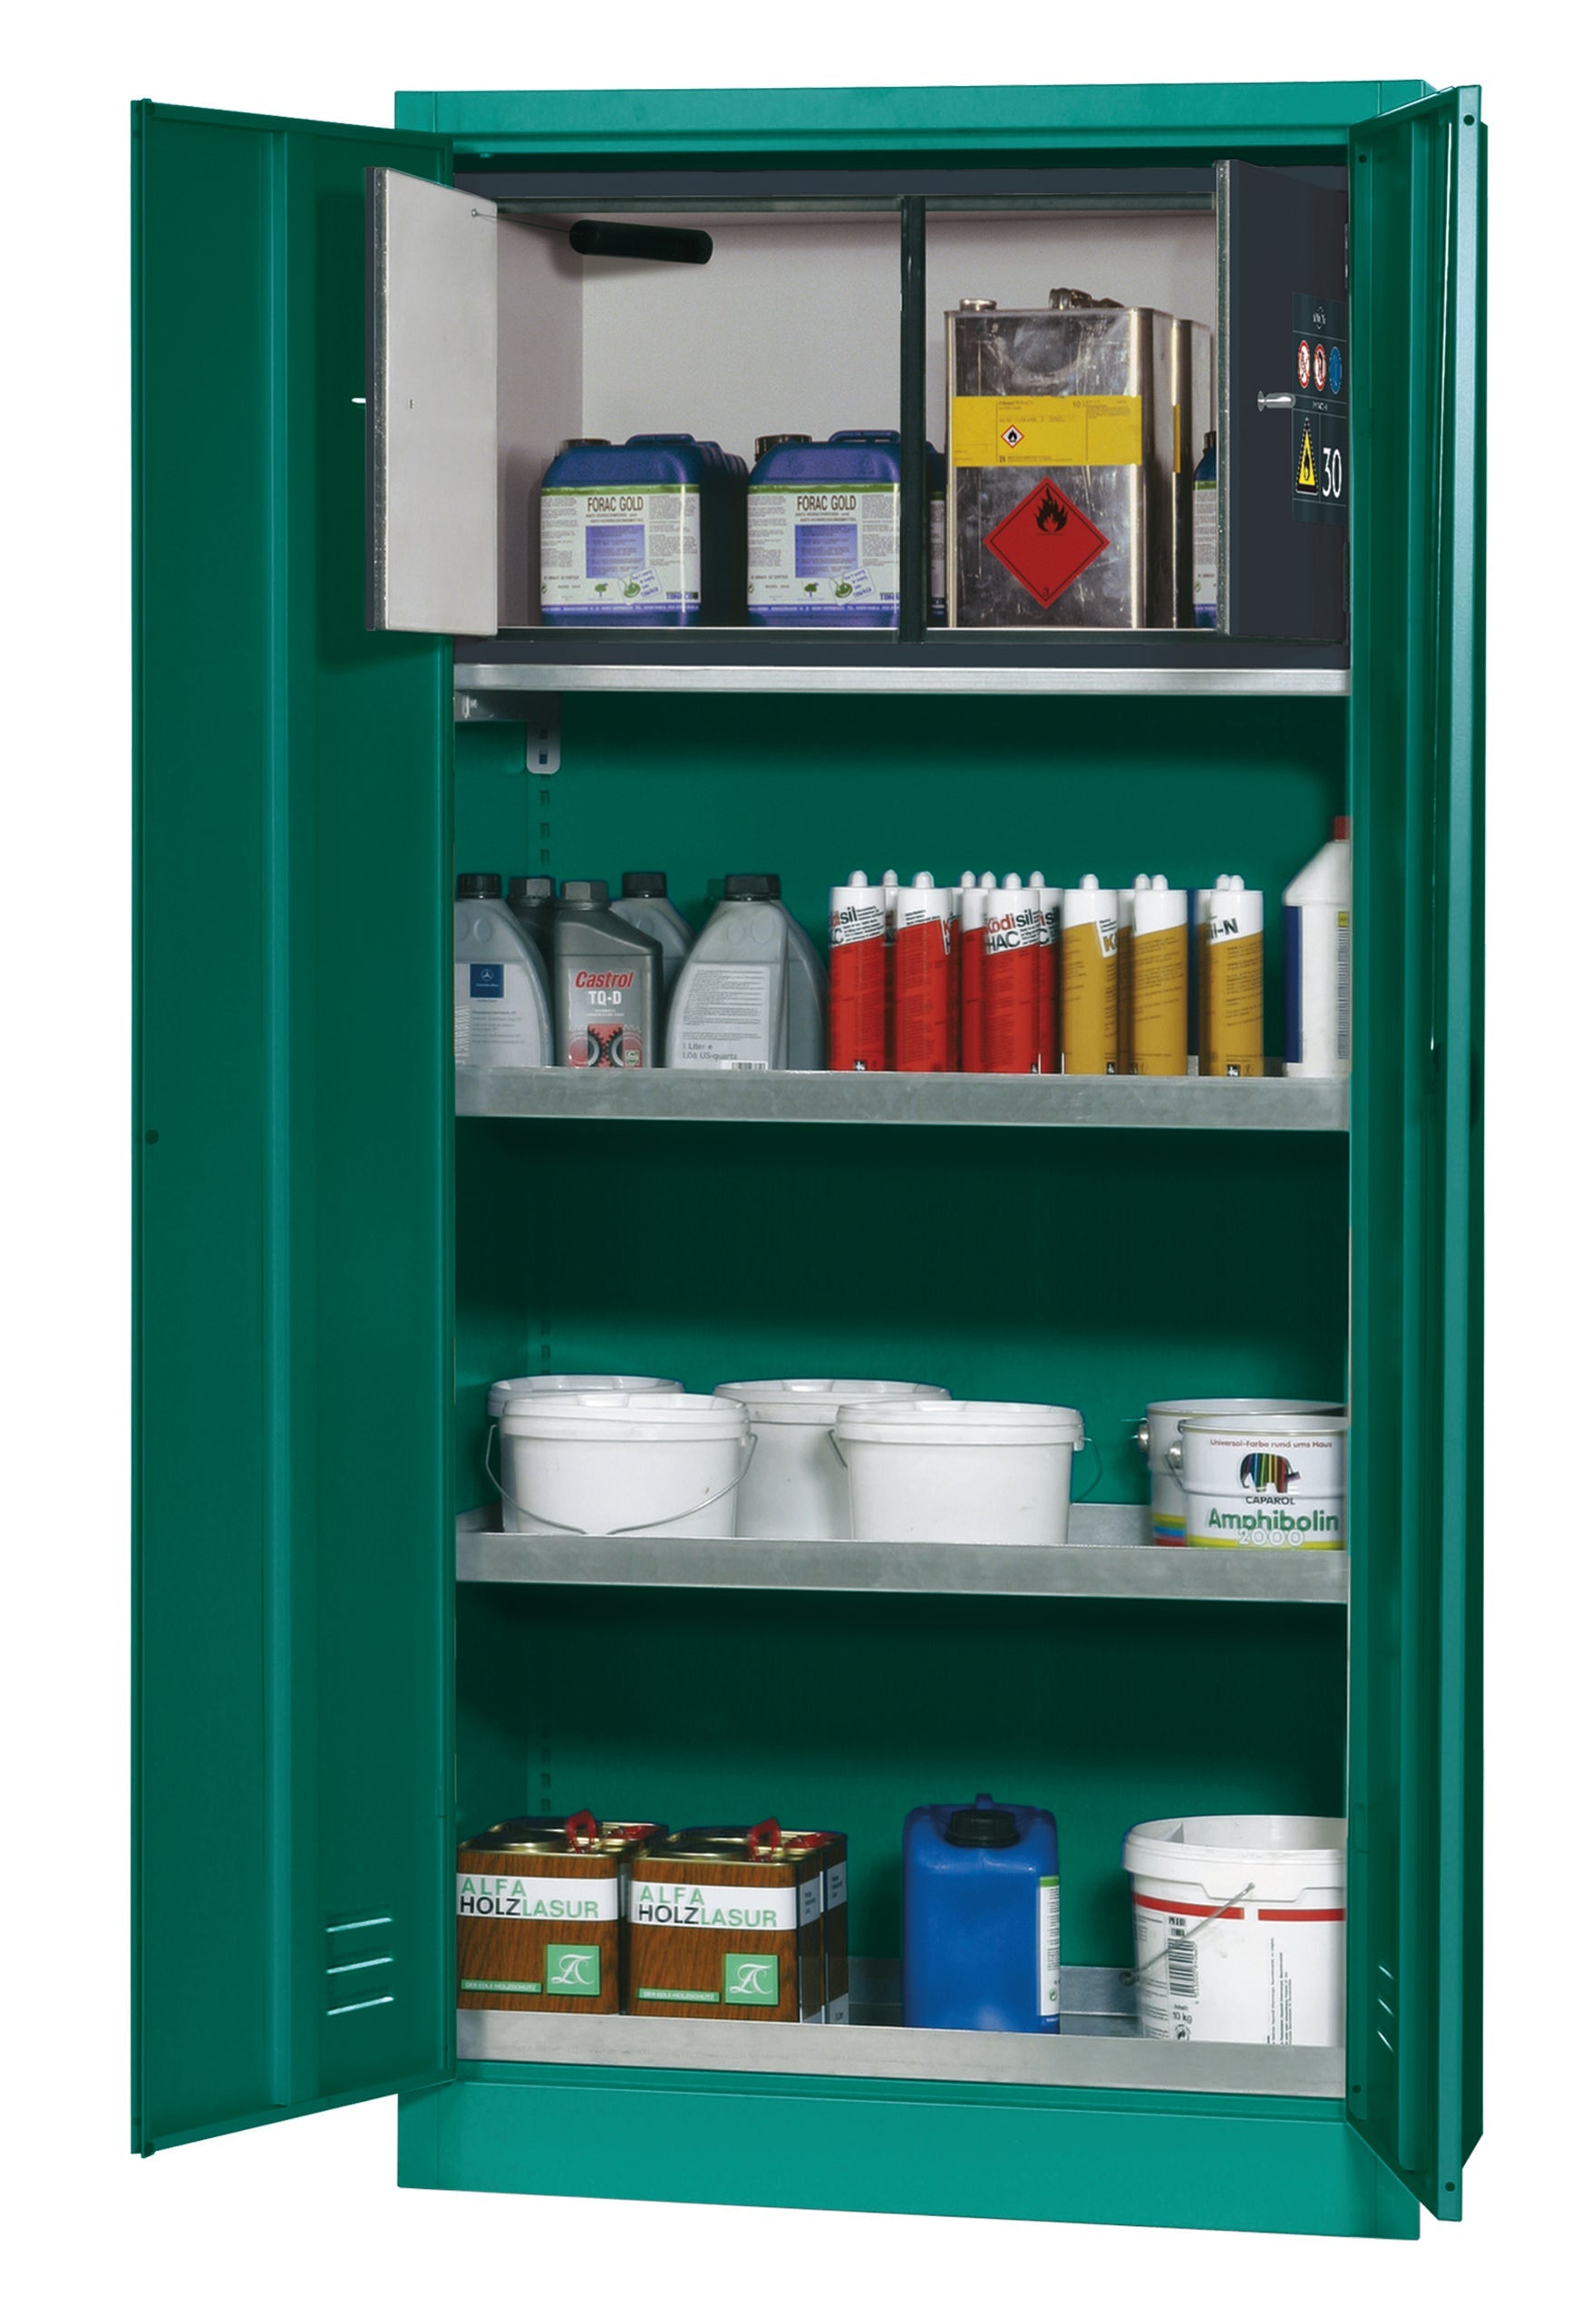 Plant protection product cabinet E-PSM-UF model EP.195.095.F (incl. Type 30 box) in turquoise green RAL 6016 with 2x standard tray base (sheet steel)